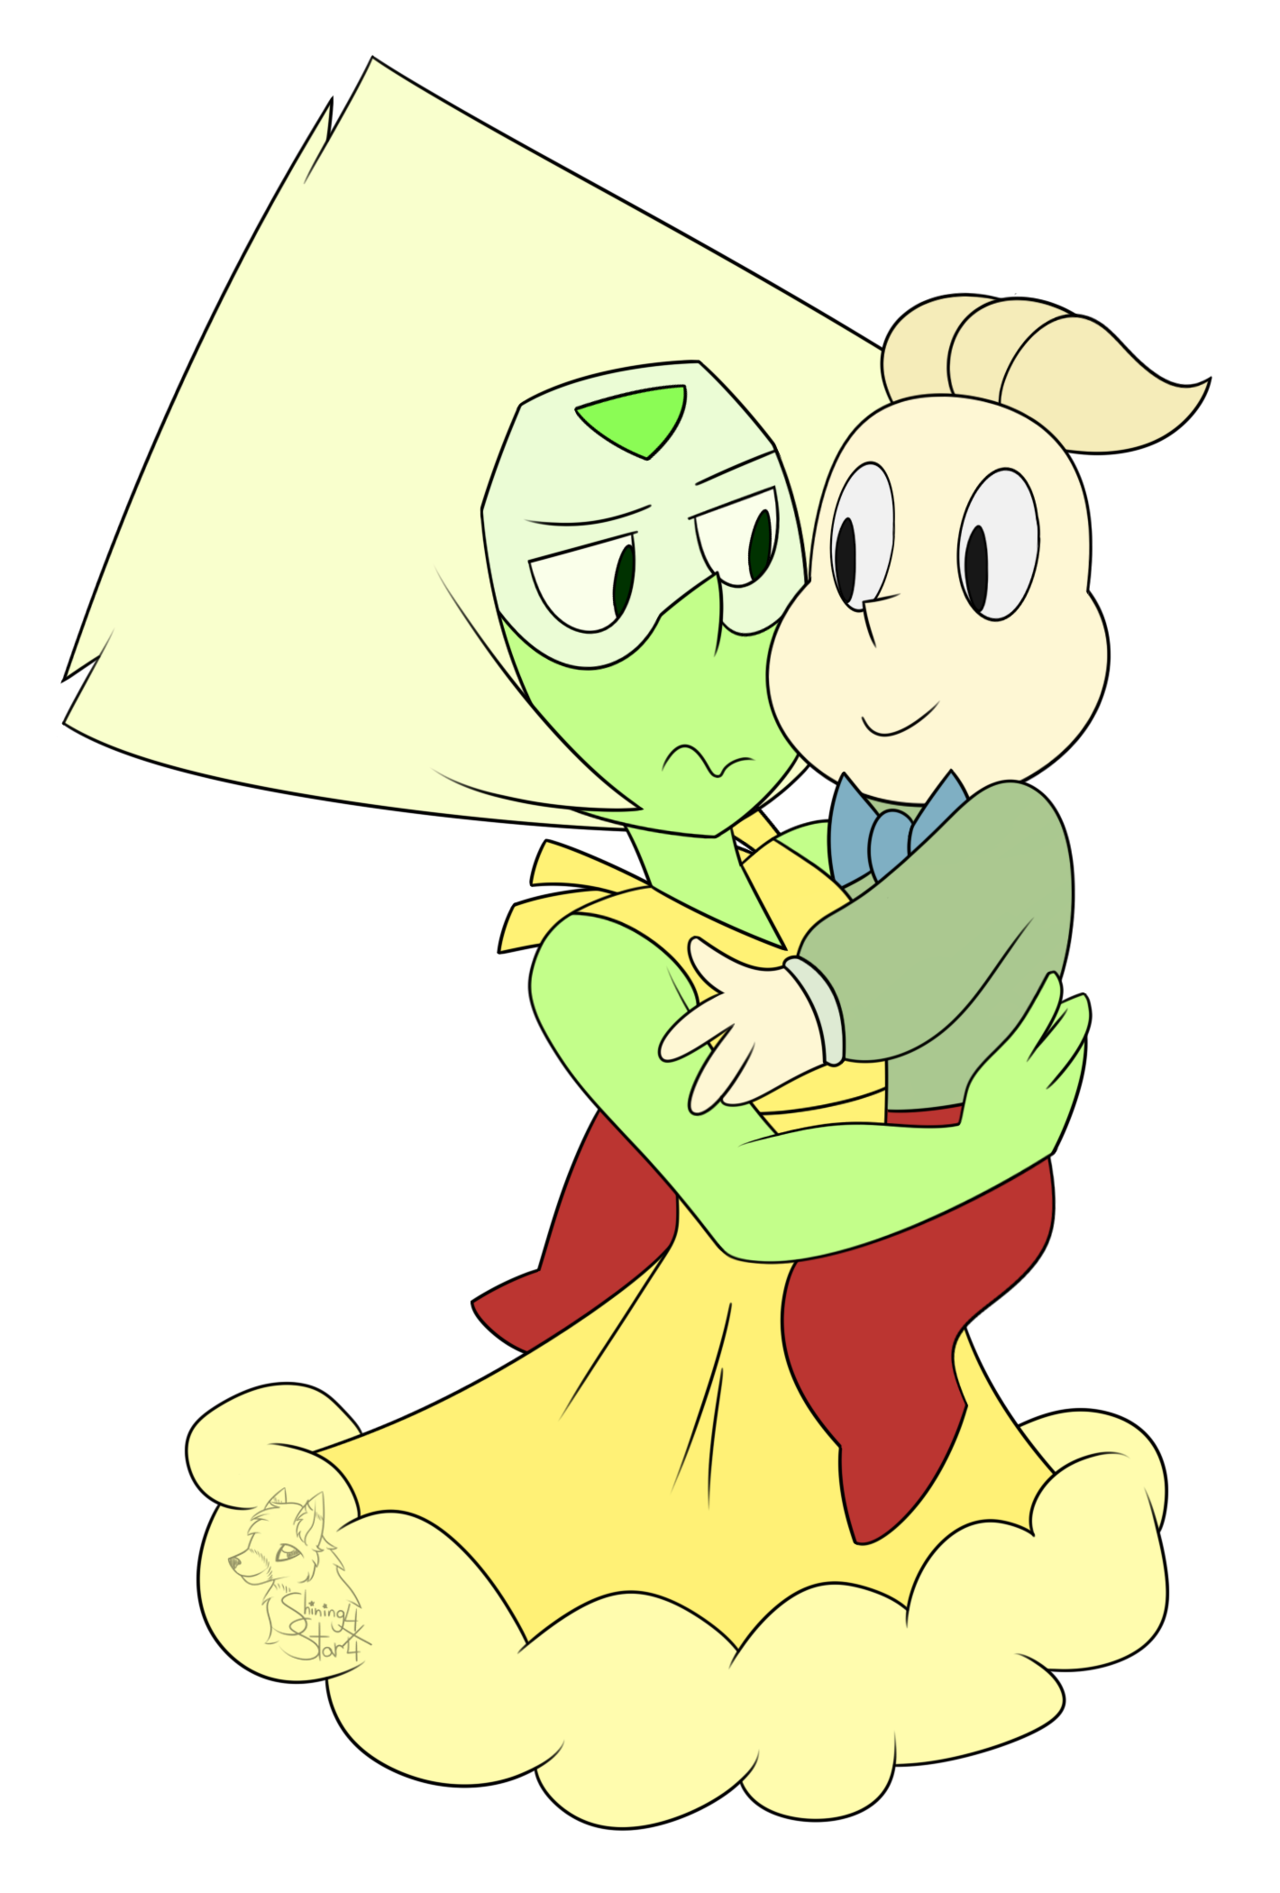 Peridot was absolutely adorable in the latest episode. We loved her dress and the idea of her being friends with Onion and just hanging out has been between us for awhile.